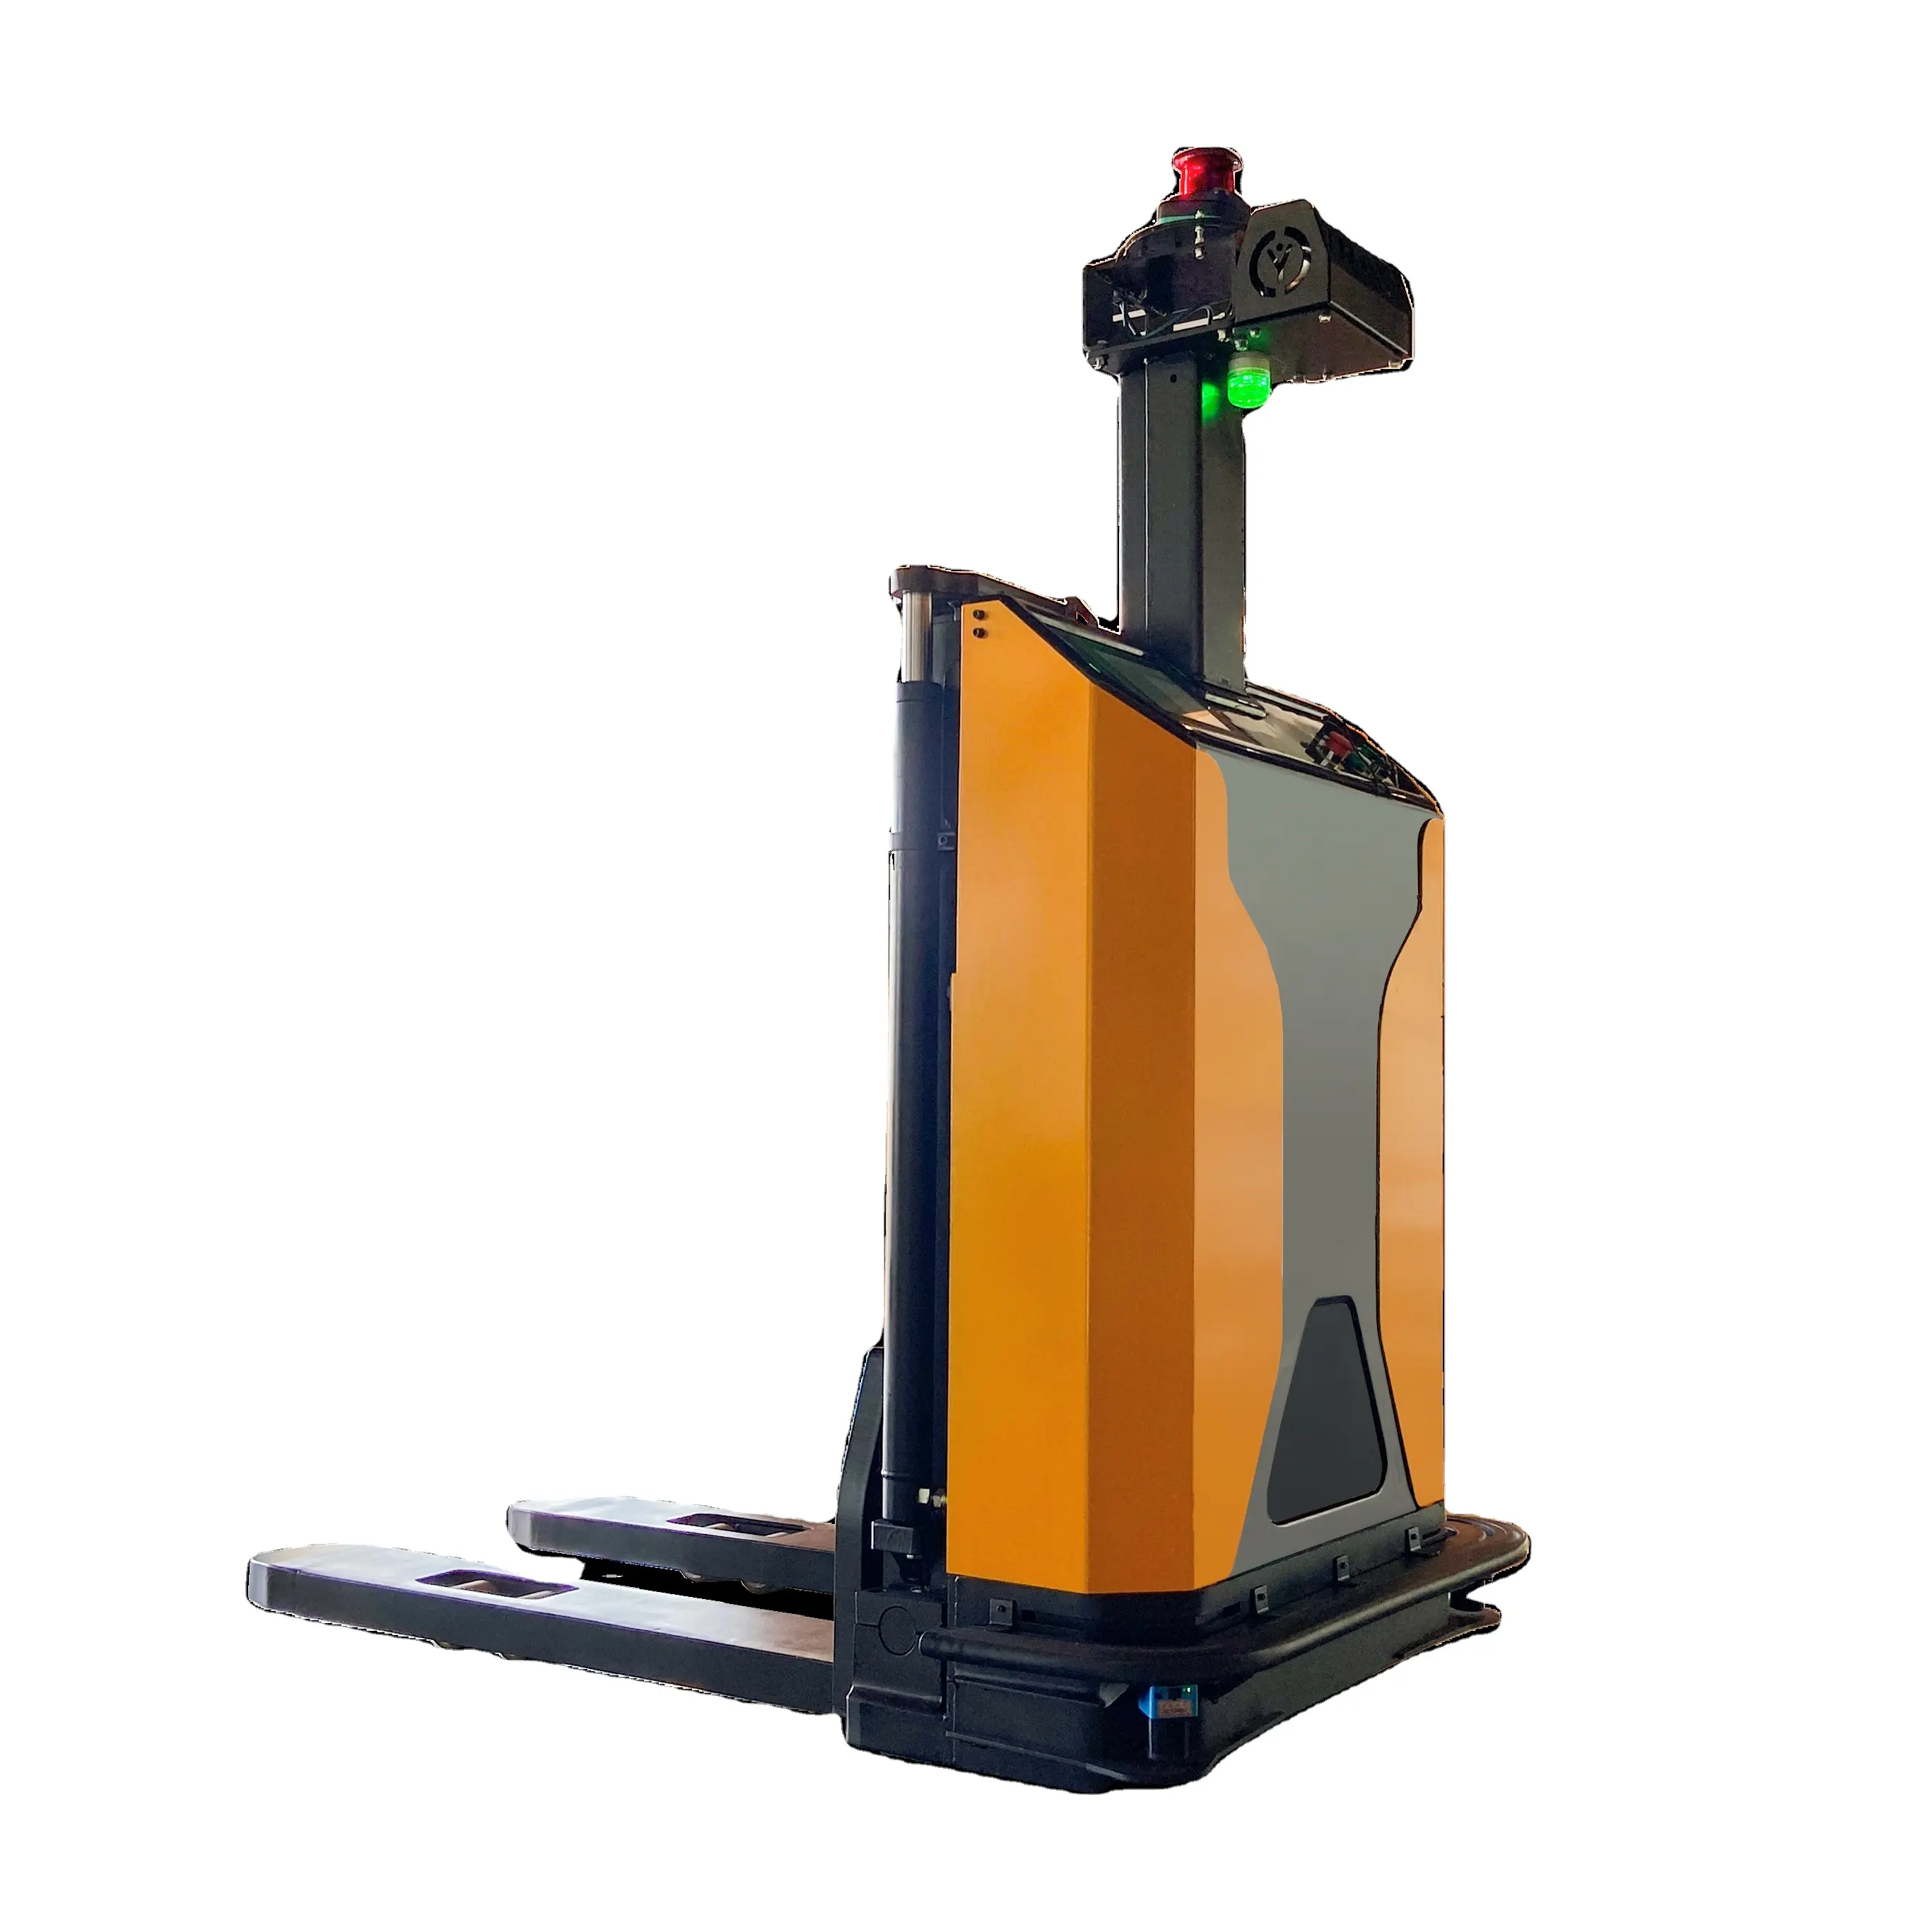 AGV forklift for your warehouse with less manpower